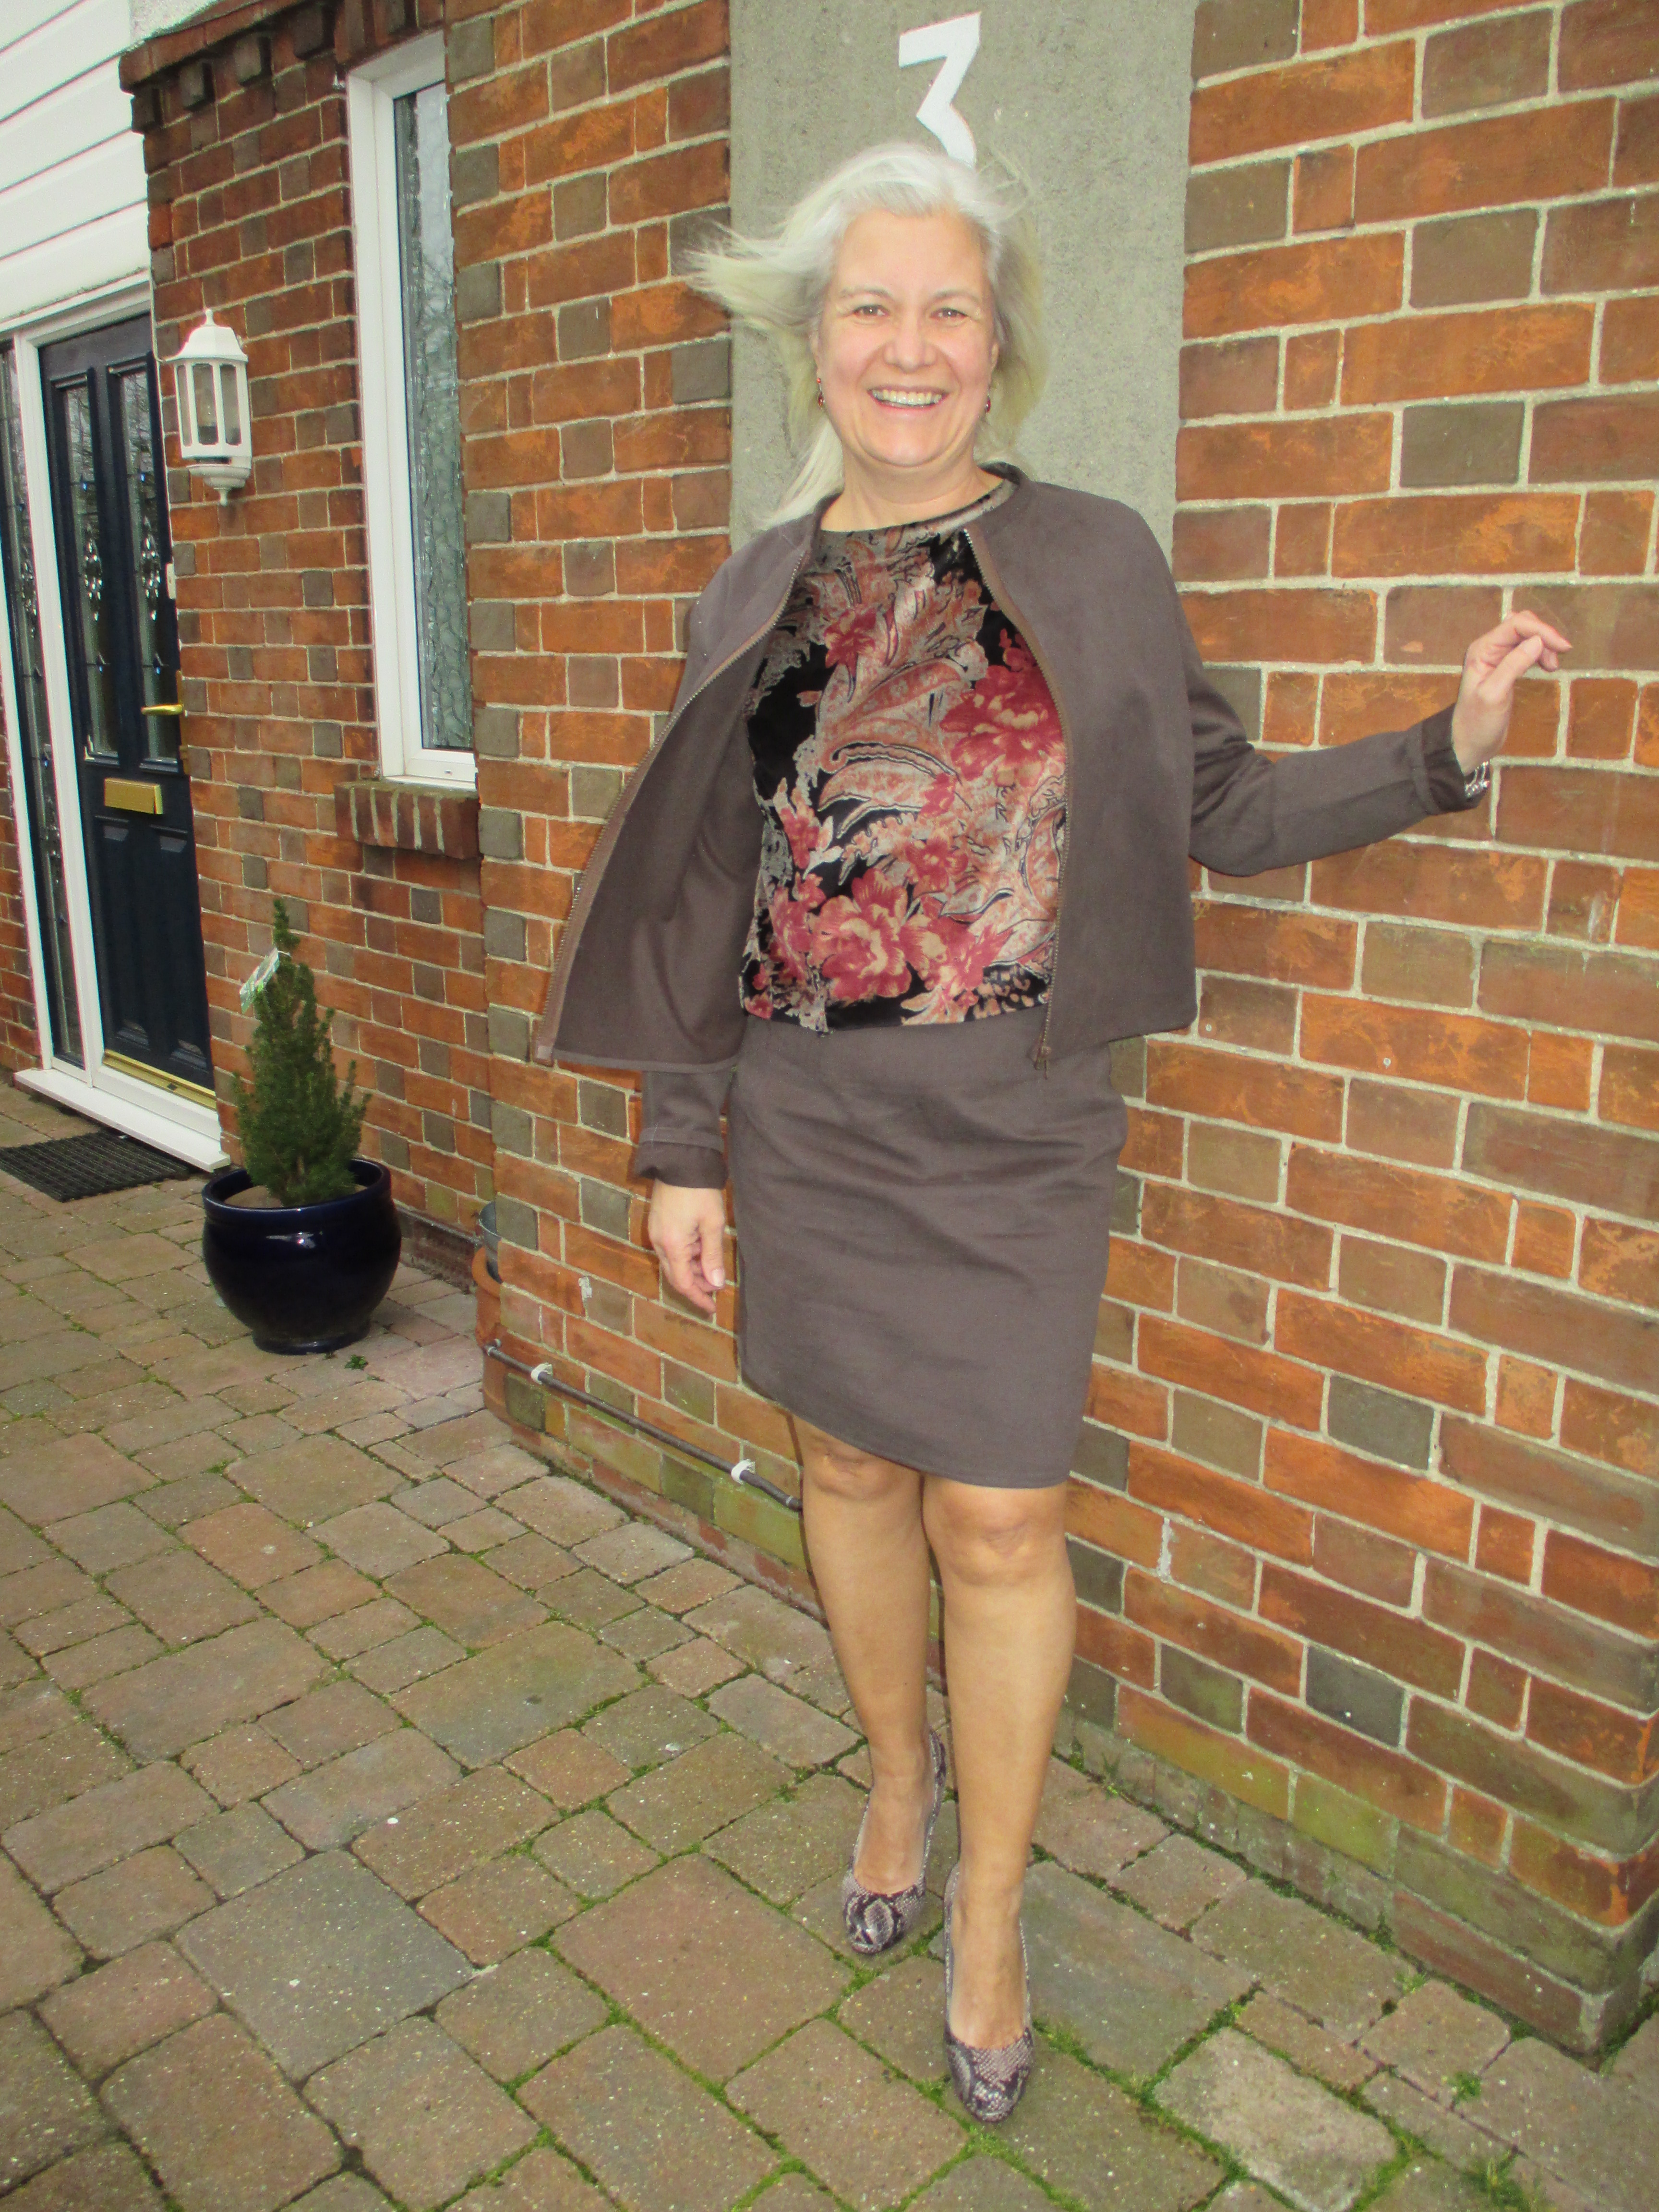 sunday lunch outfit........... – Sewing Projects | BurdaStyle.com